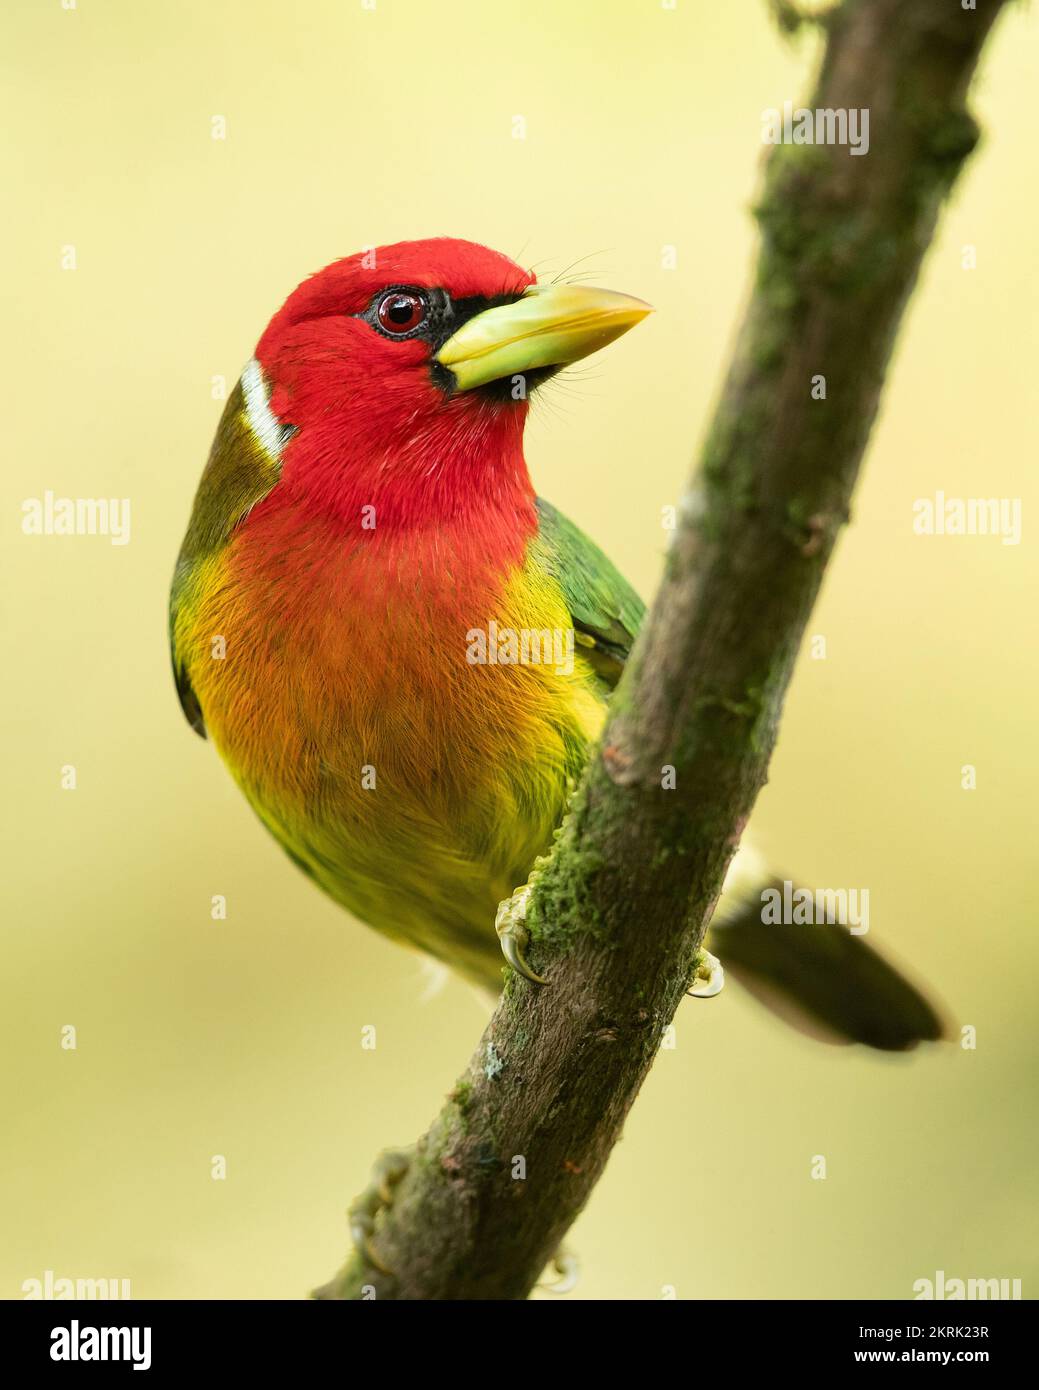 Red-headed barbet Stock Photo